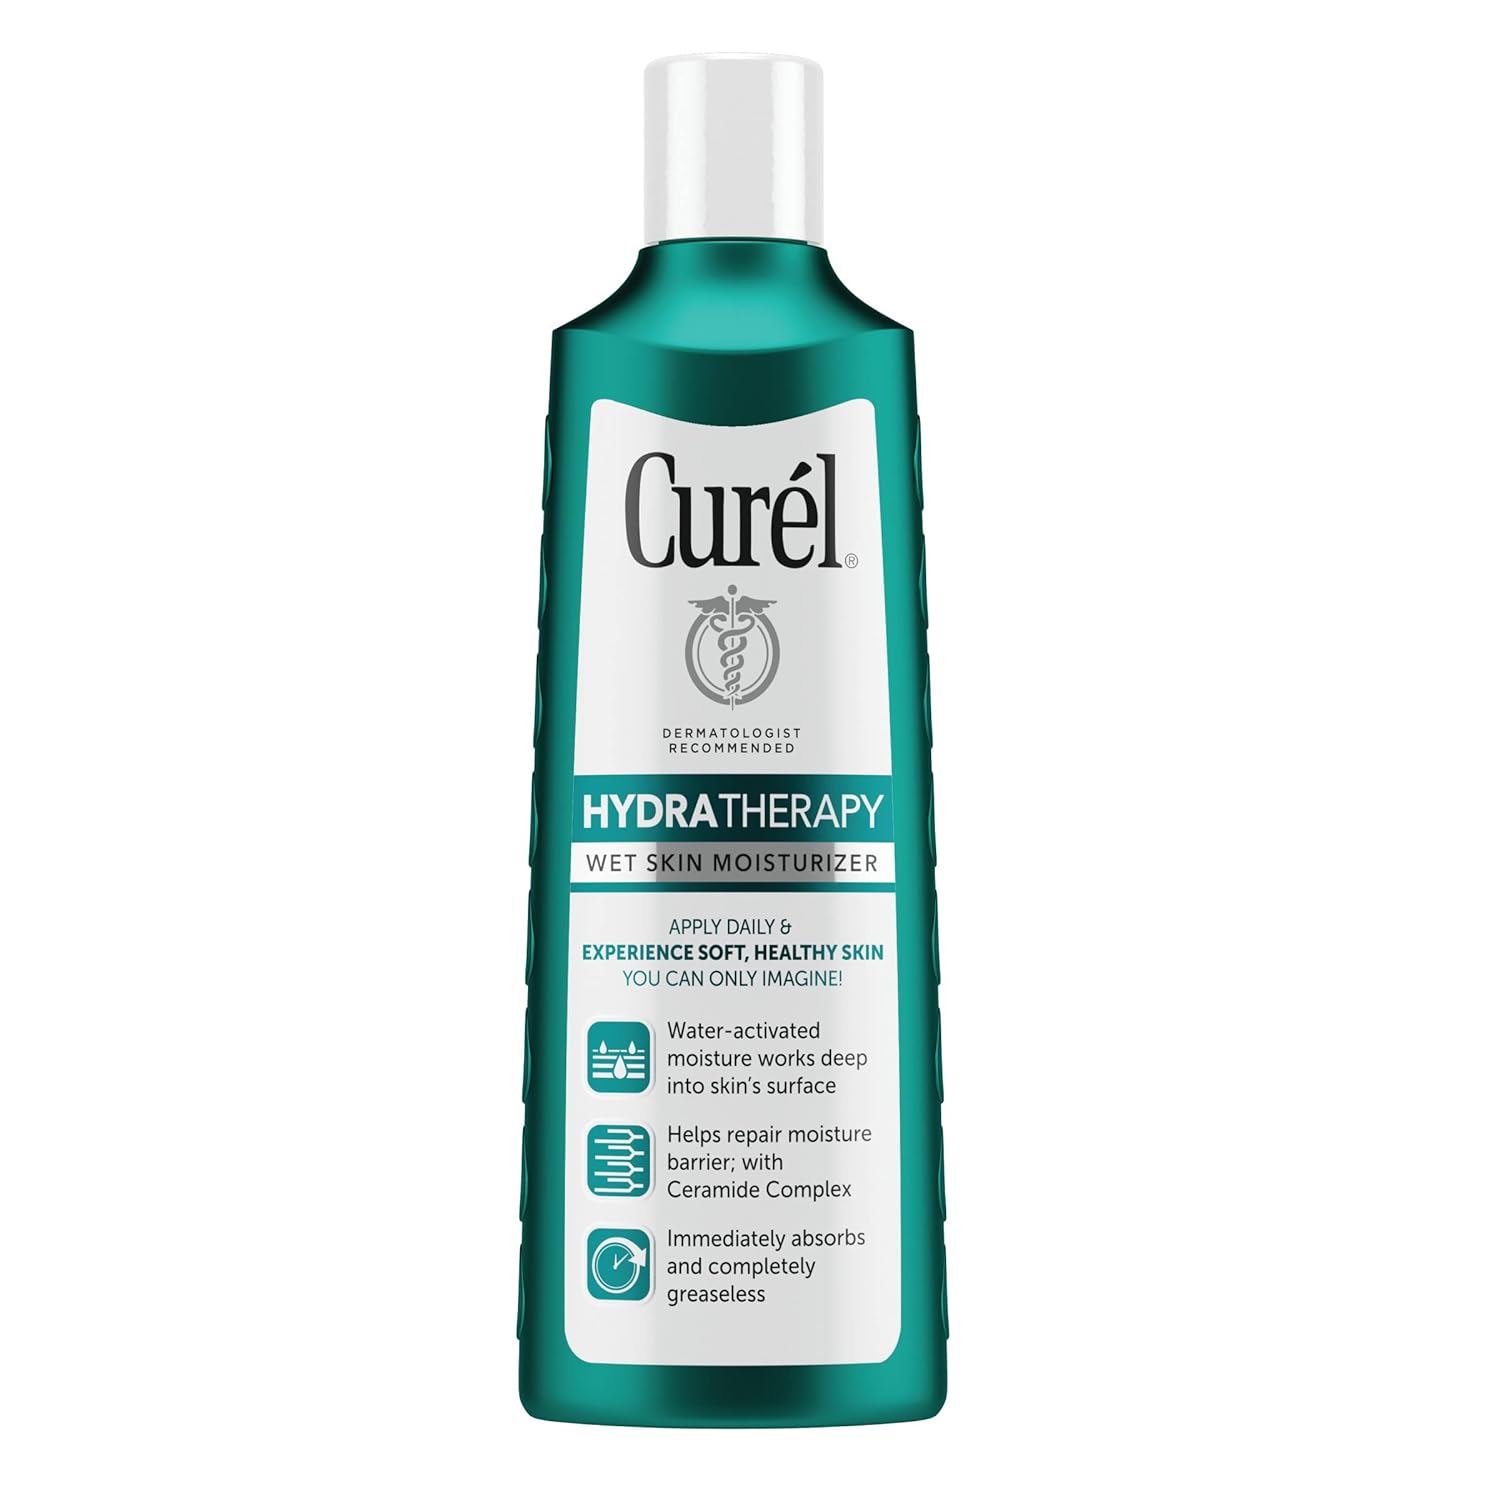 Curél Hydra Therapy, Instant Moisturizer, 8 Fl Oz (Pack of 1), Wet Skin Lotion for Dry or Extra-dry Skin, with Advanced Ceramide Complex, Experience Optimal Moisture Retention